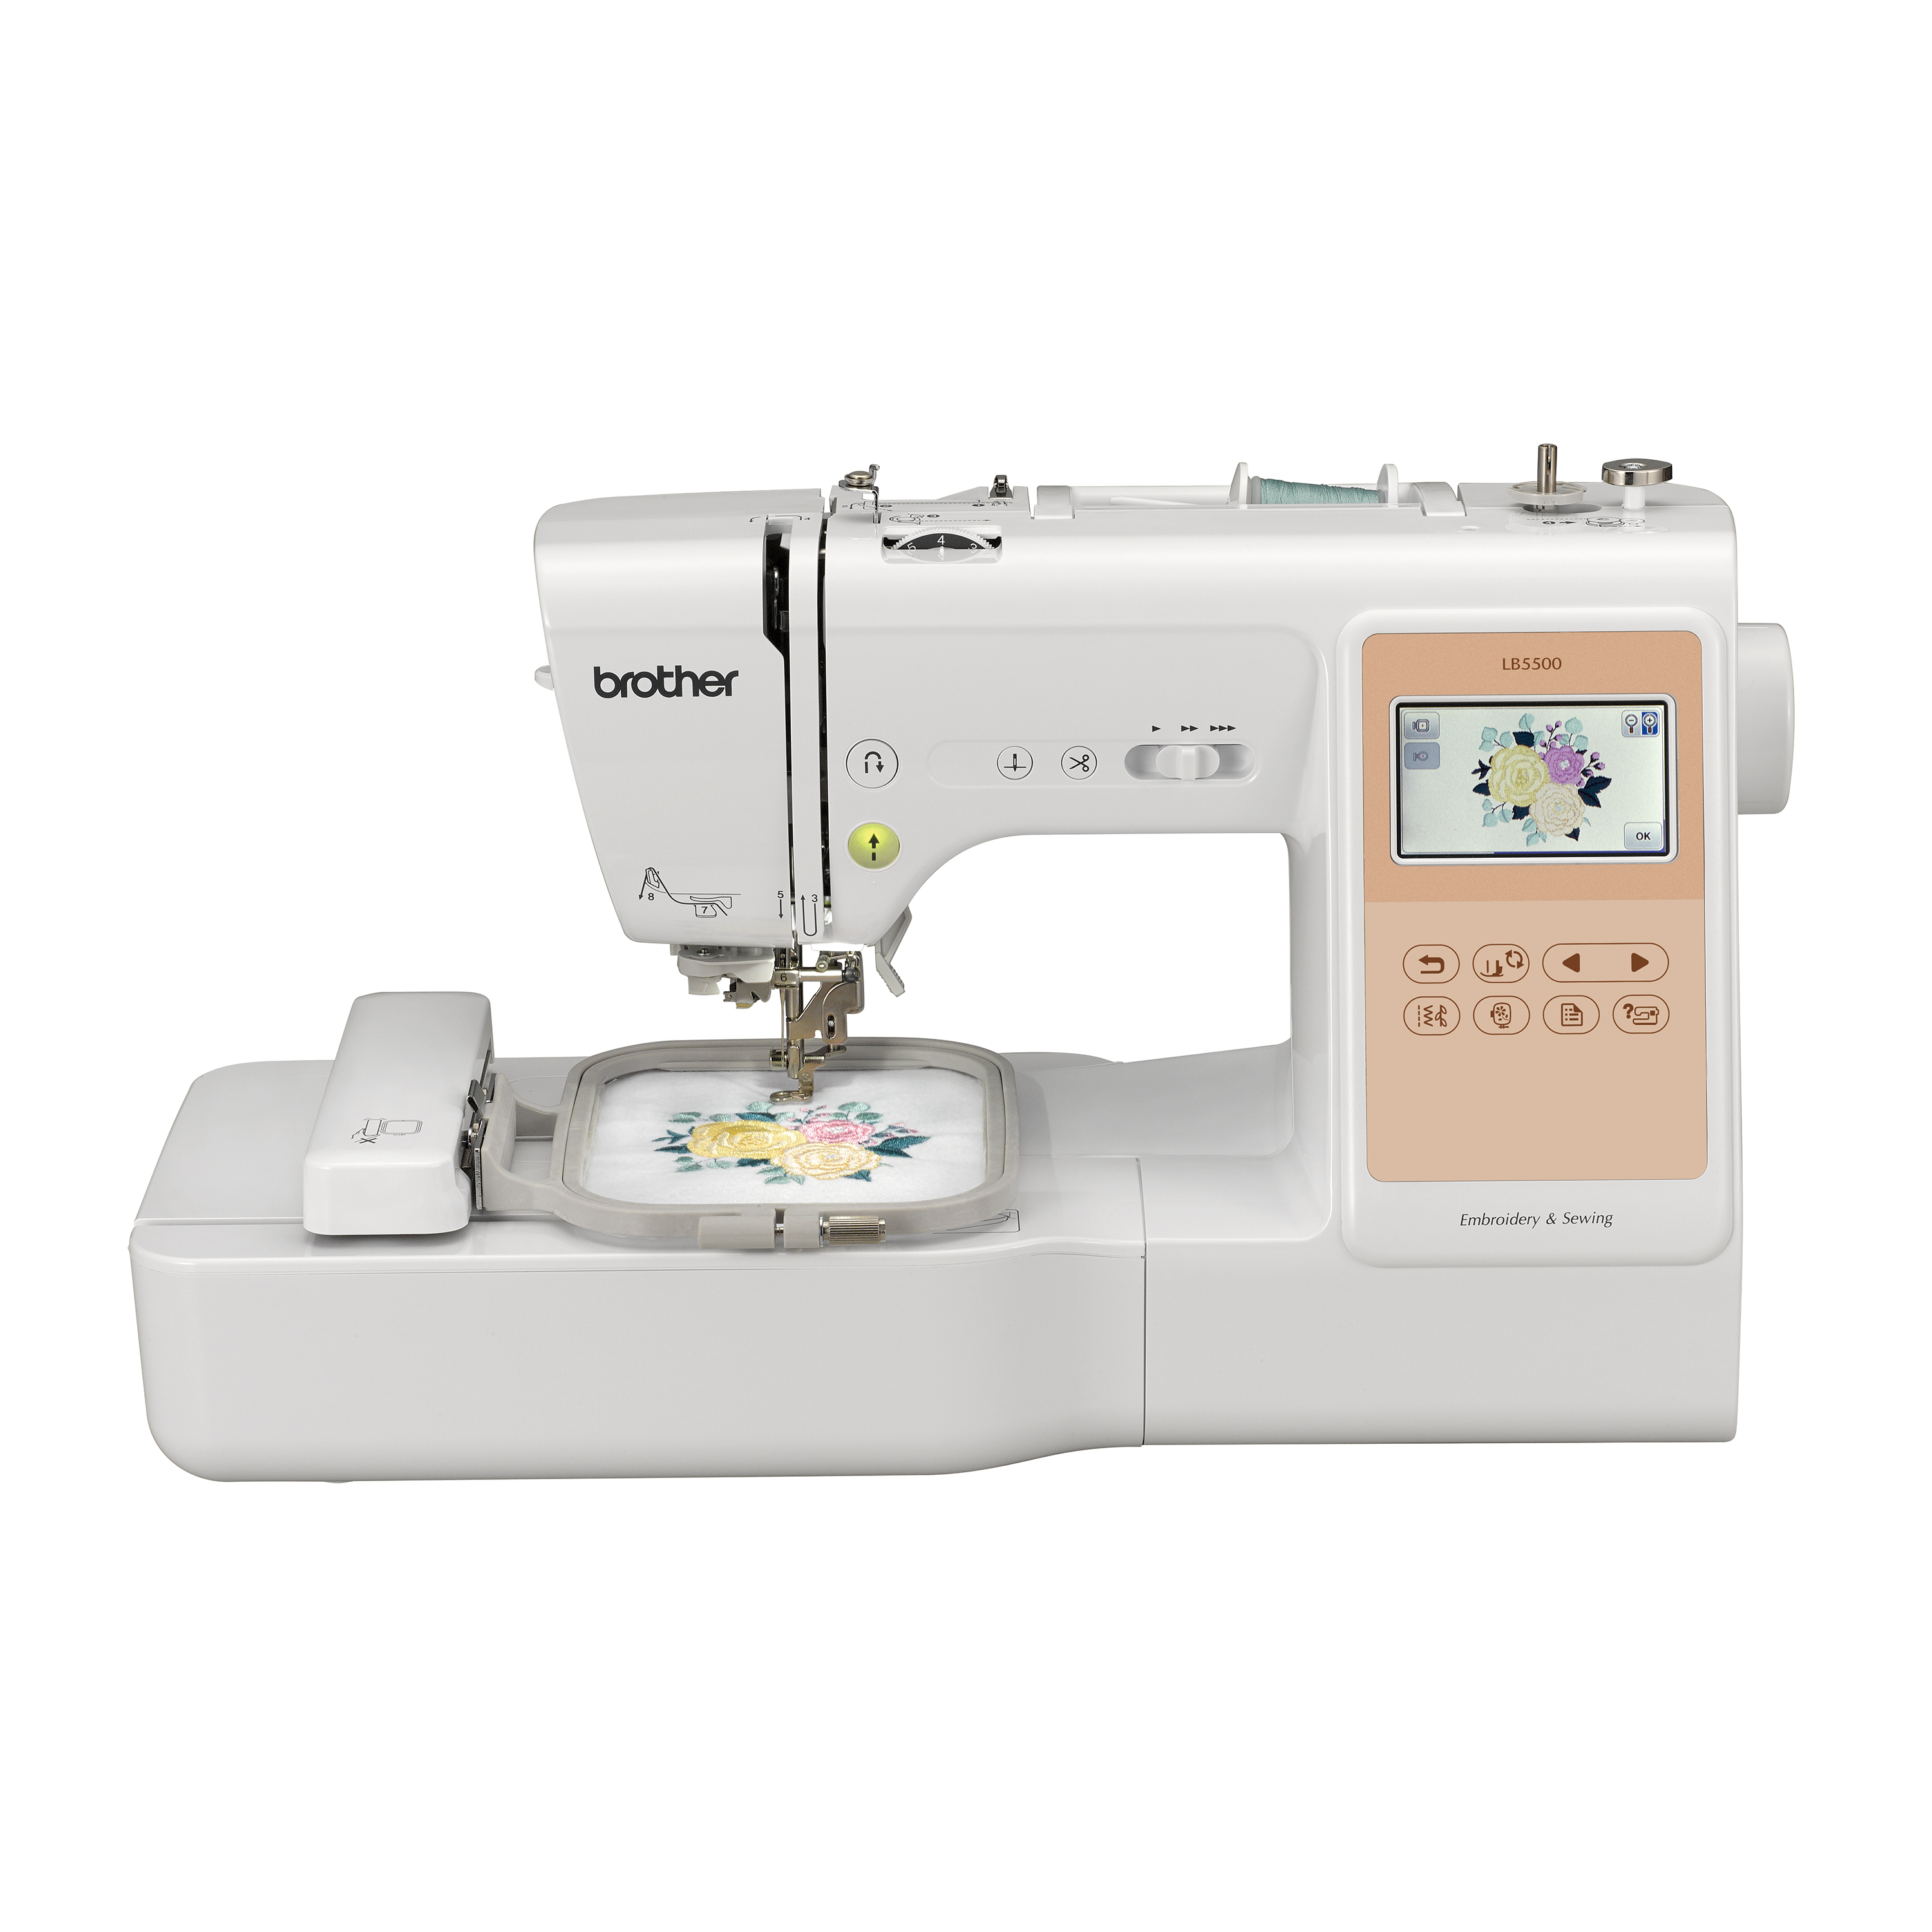 Brother Embroidery Machines for sale in Kansas City, Missouri